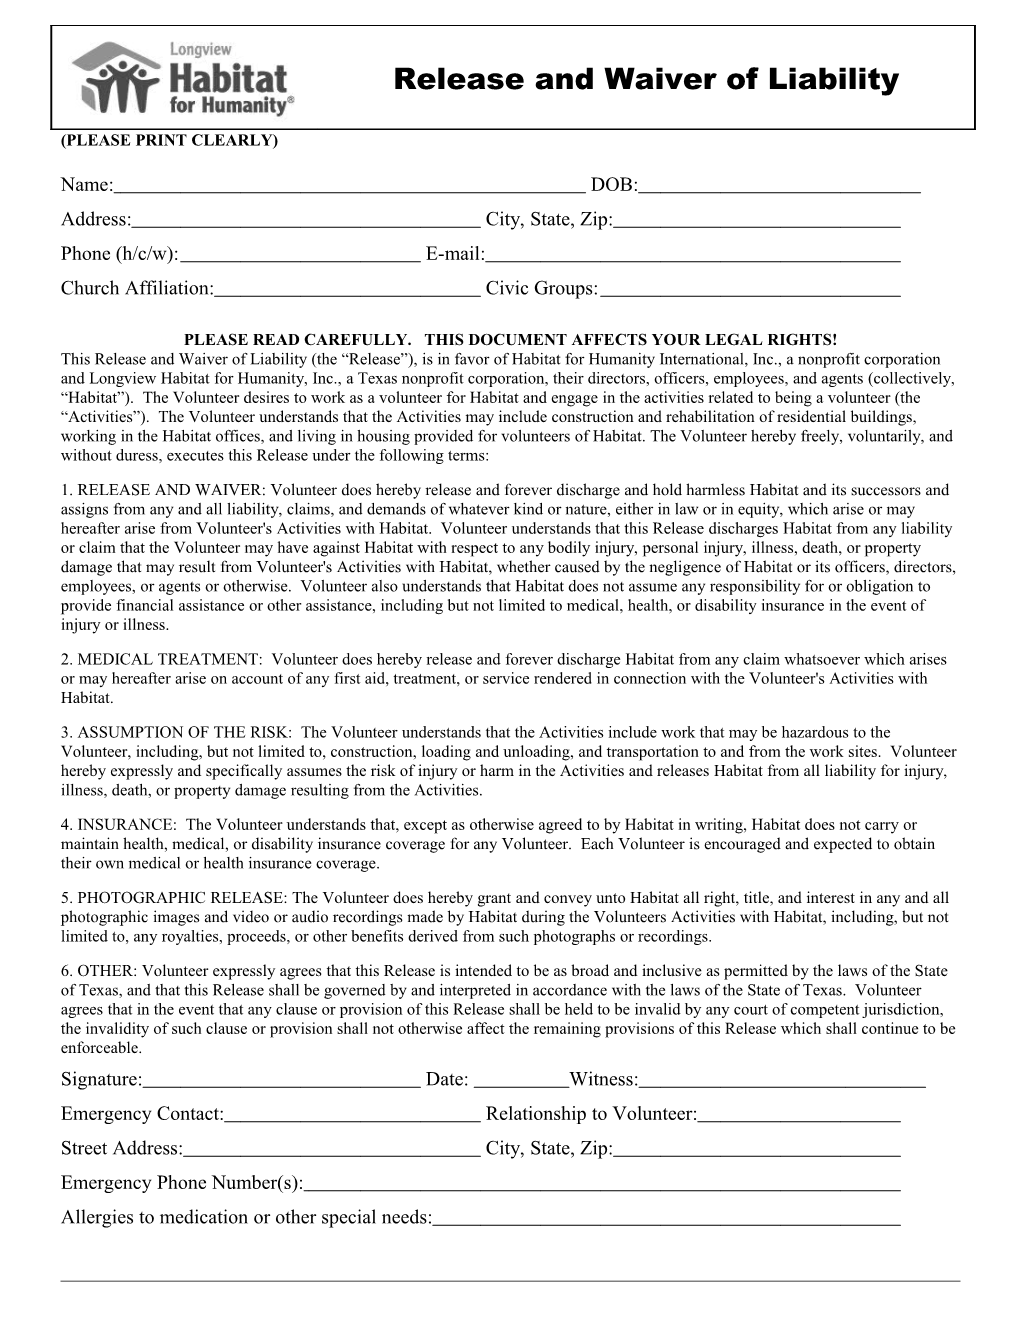 All Volunteers Must Have a Completed Waiver of Liability on File with Longview Habitat